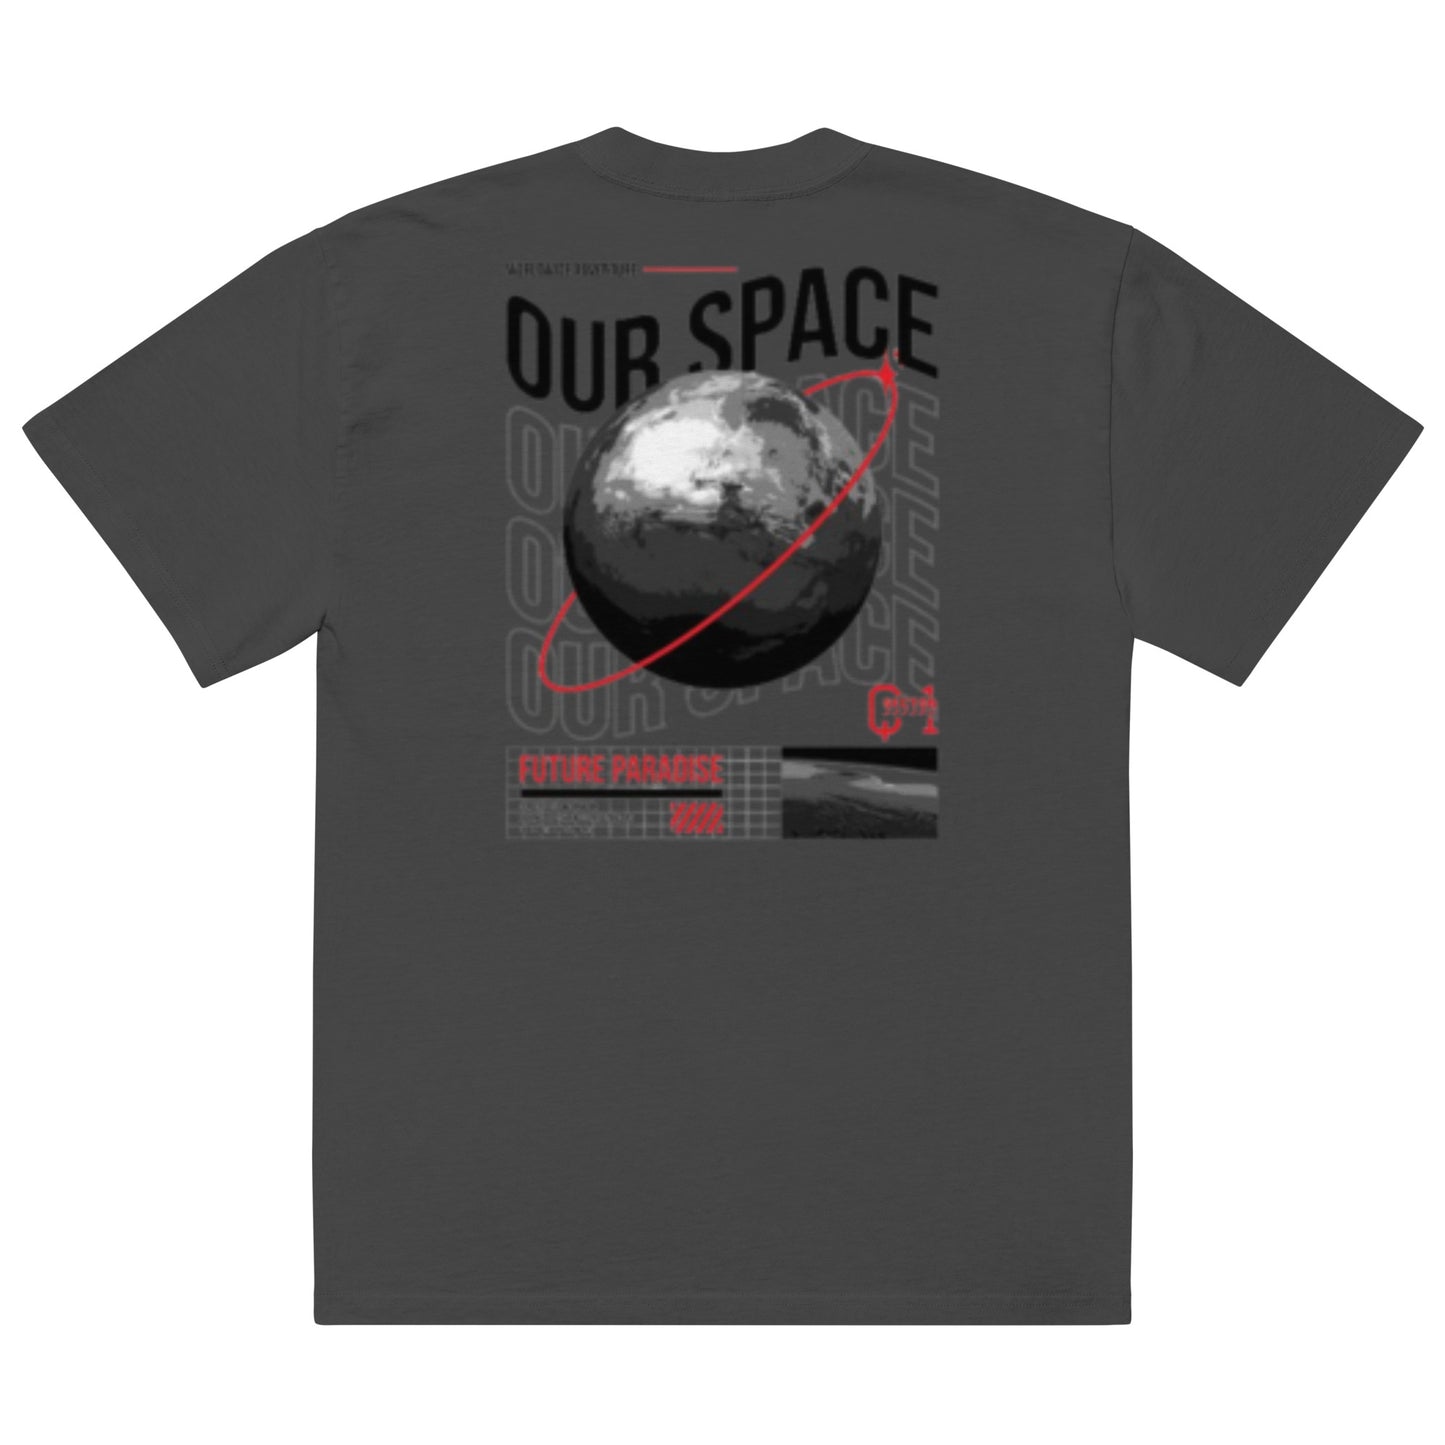 Our Space Men's Oversized T-shirt